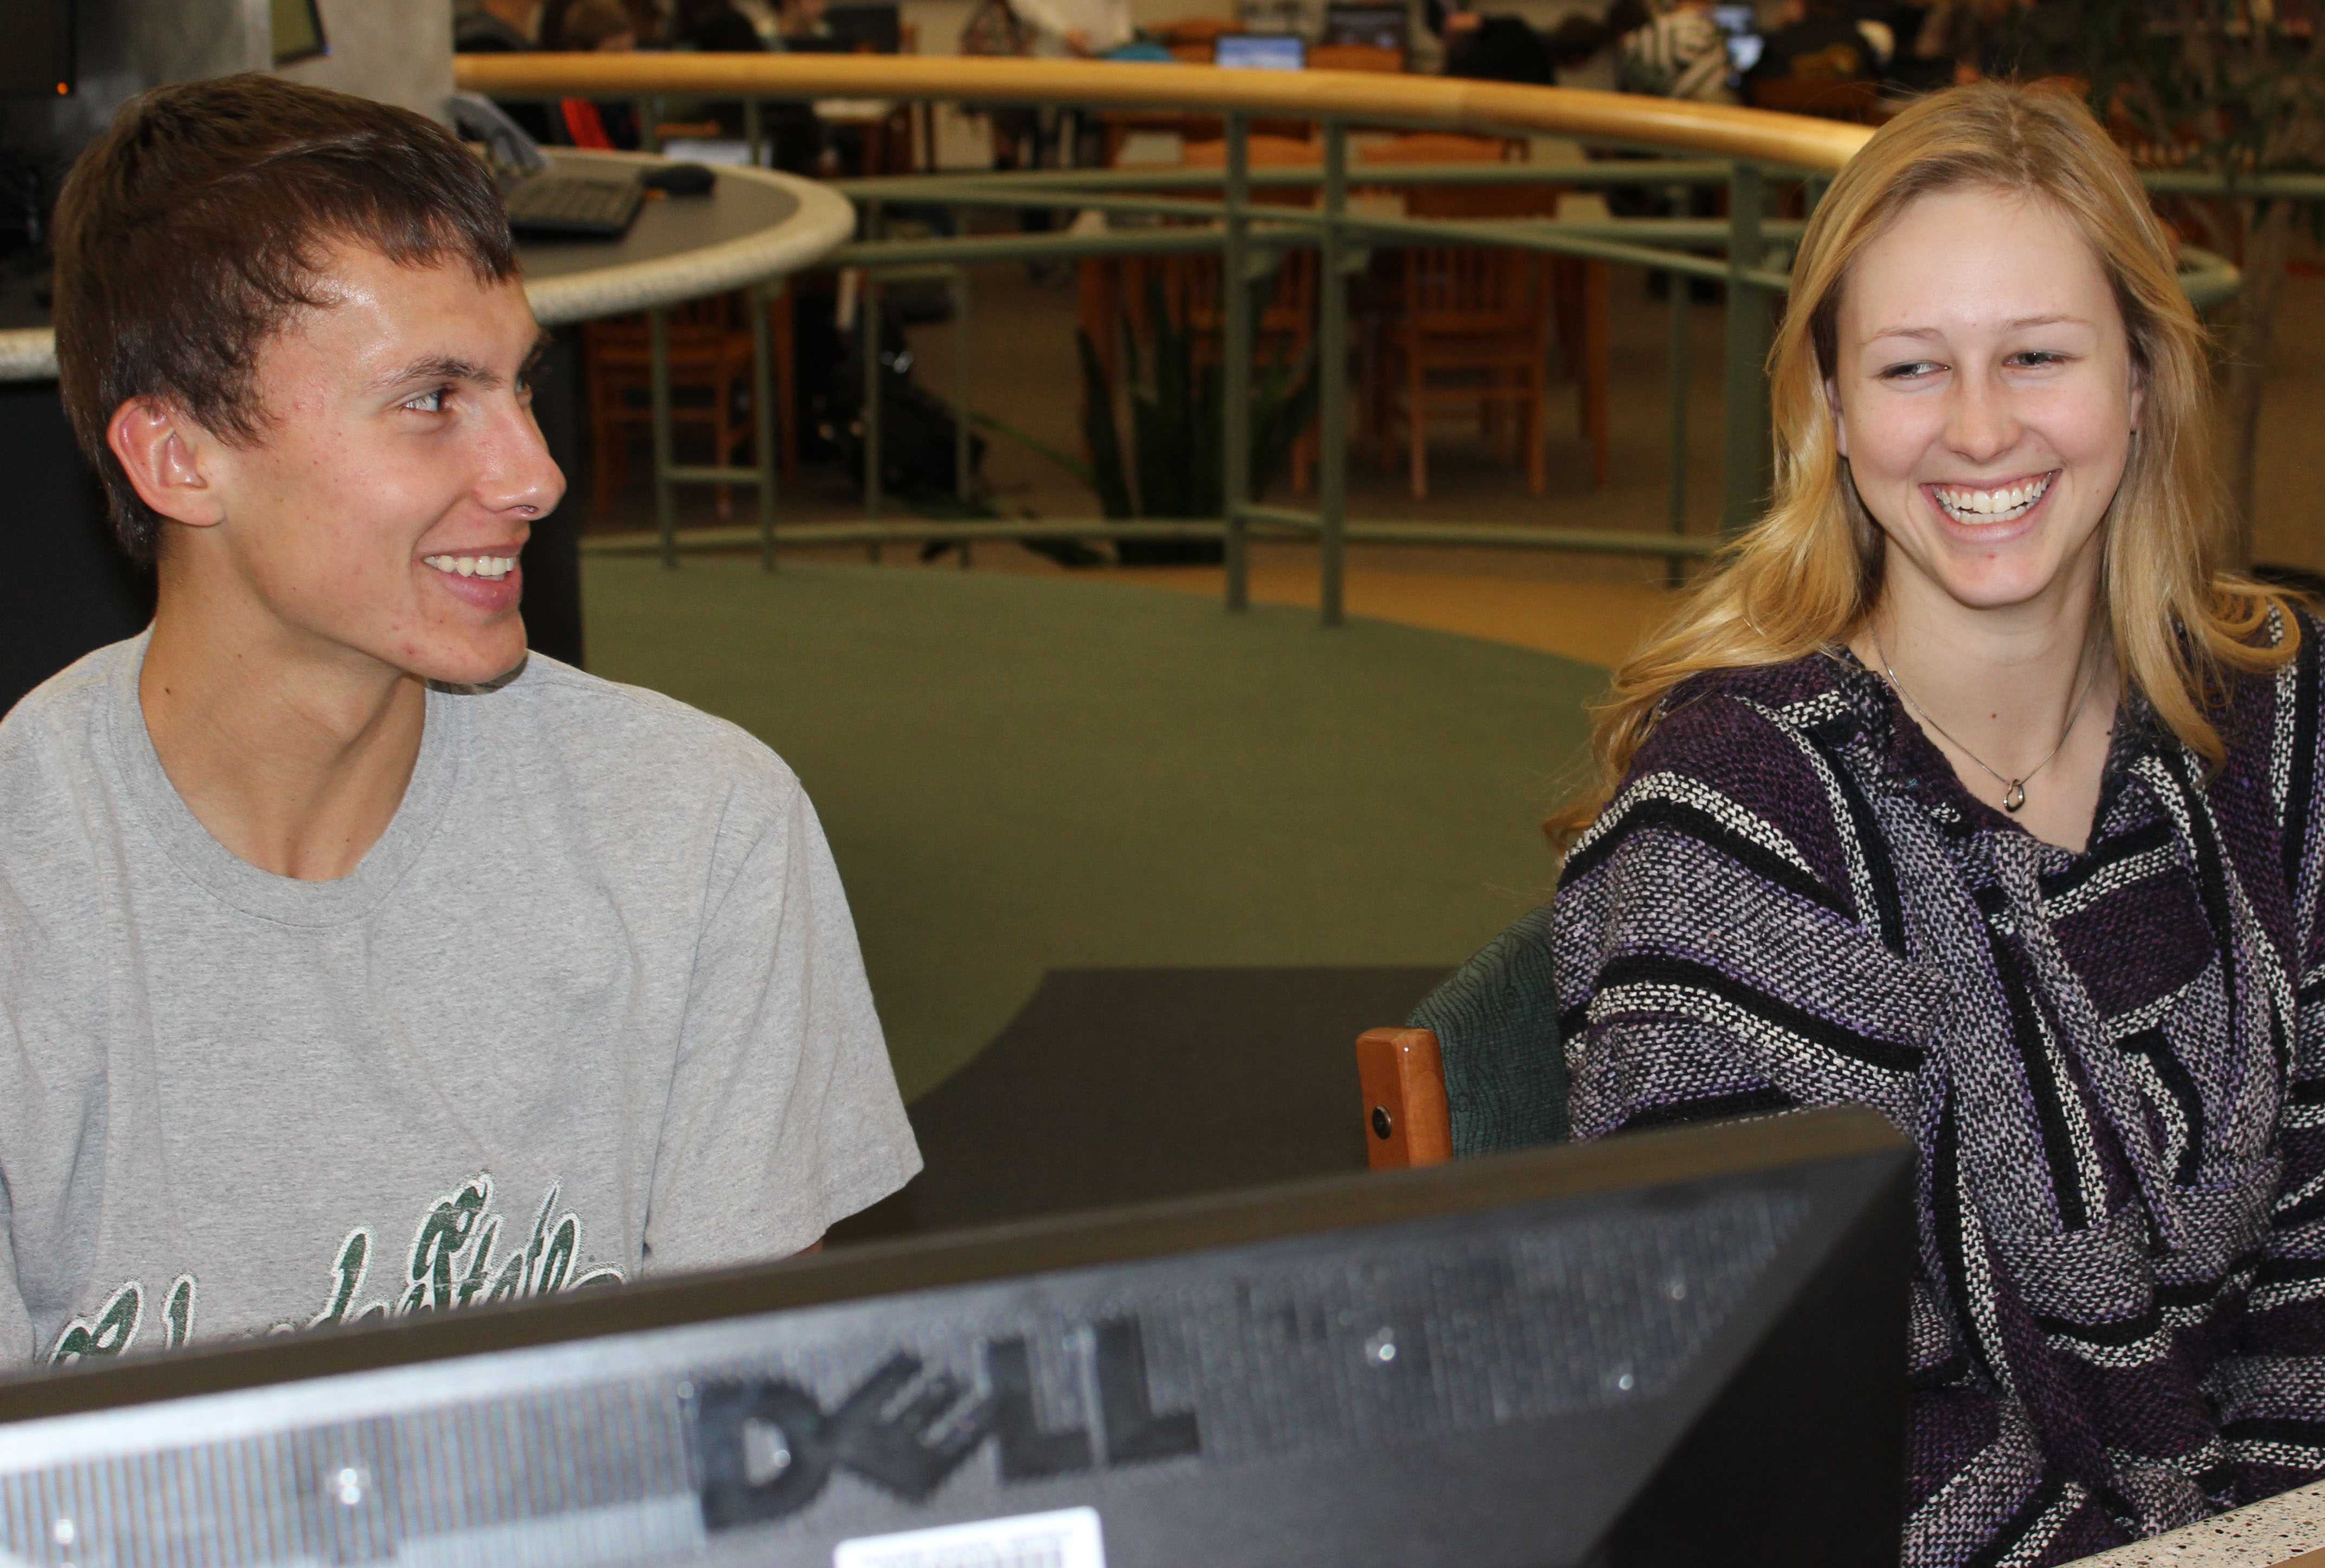 Seniors Aaron Bonenberger and Kelly Evans laugh at each other. 
Photo By: Amber Baack